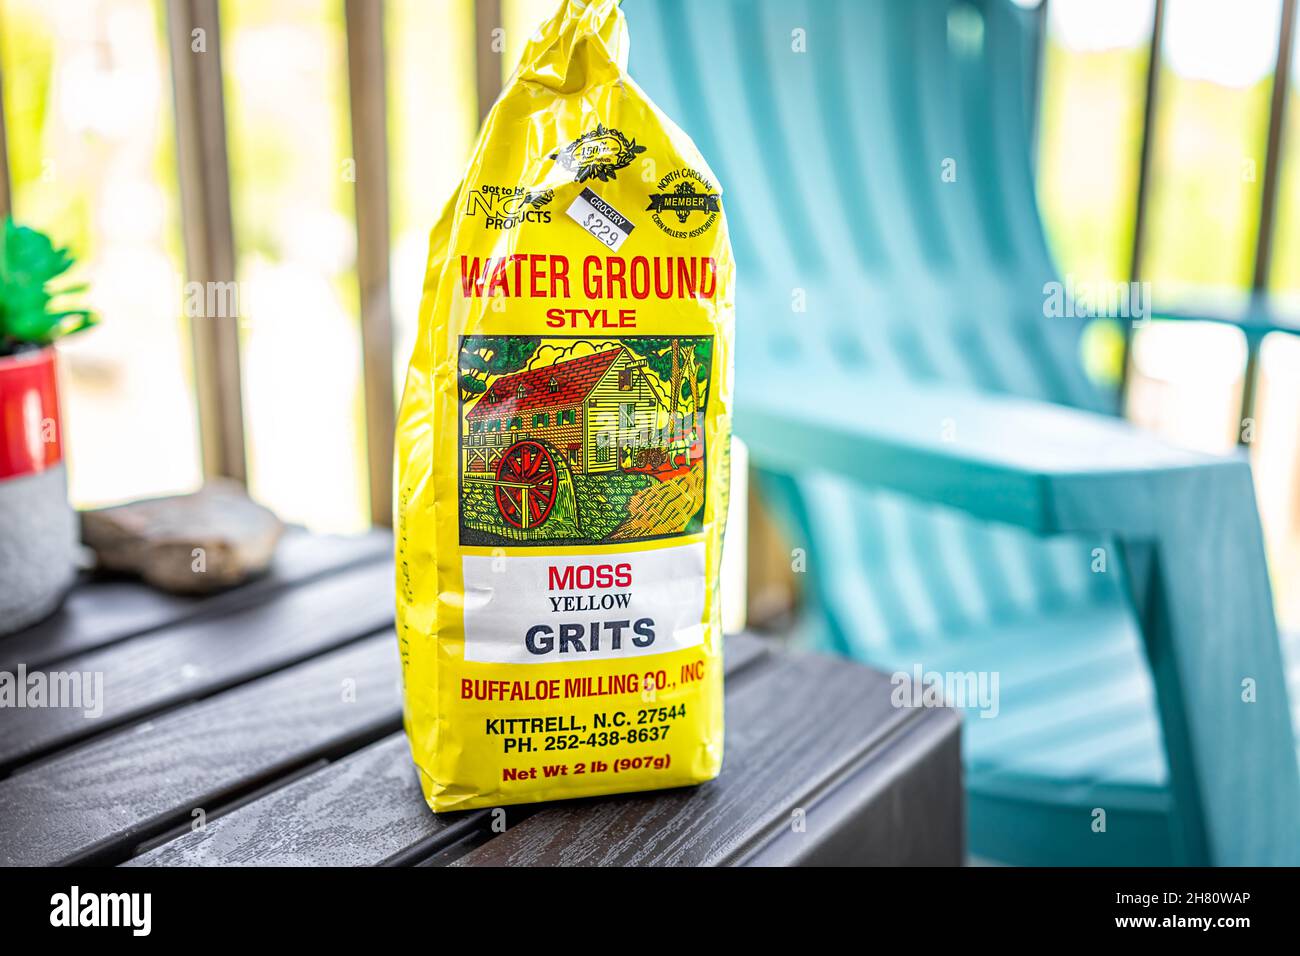 Sugar Mountain, USA - May 31, 2021: Brand sign text for Buffaloe Milling Company NC products for moss yellow grits water ground style and price label Stock Photo